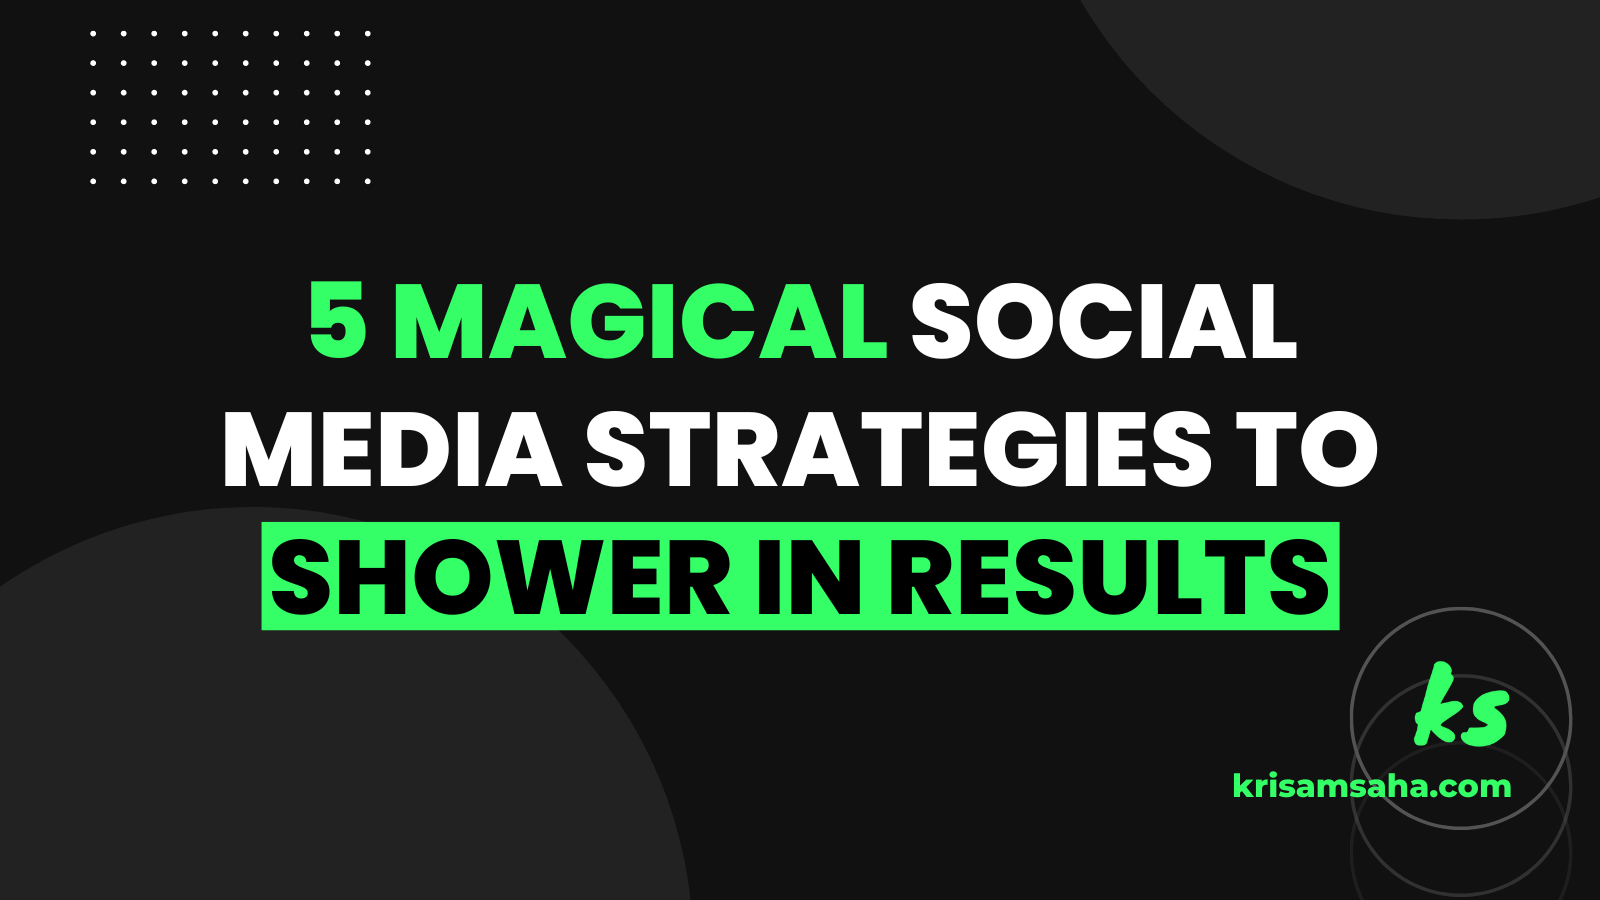 You are currently viewing 5 magical social media marketing strategies to shower in results